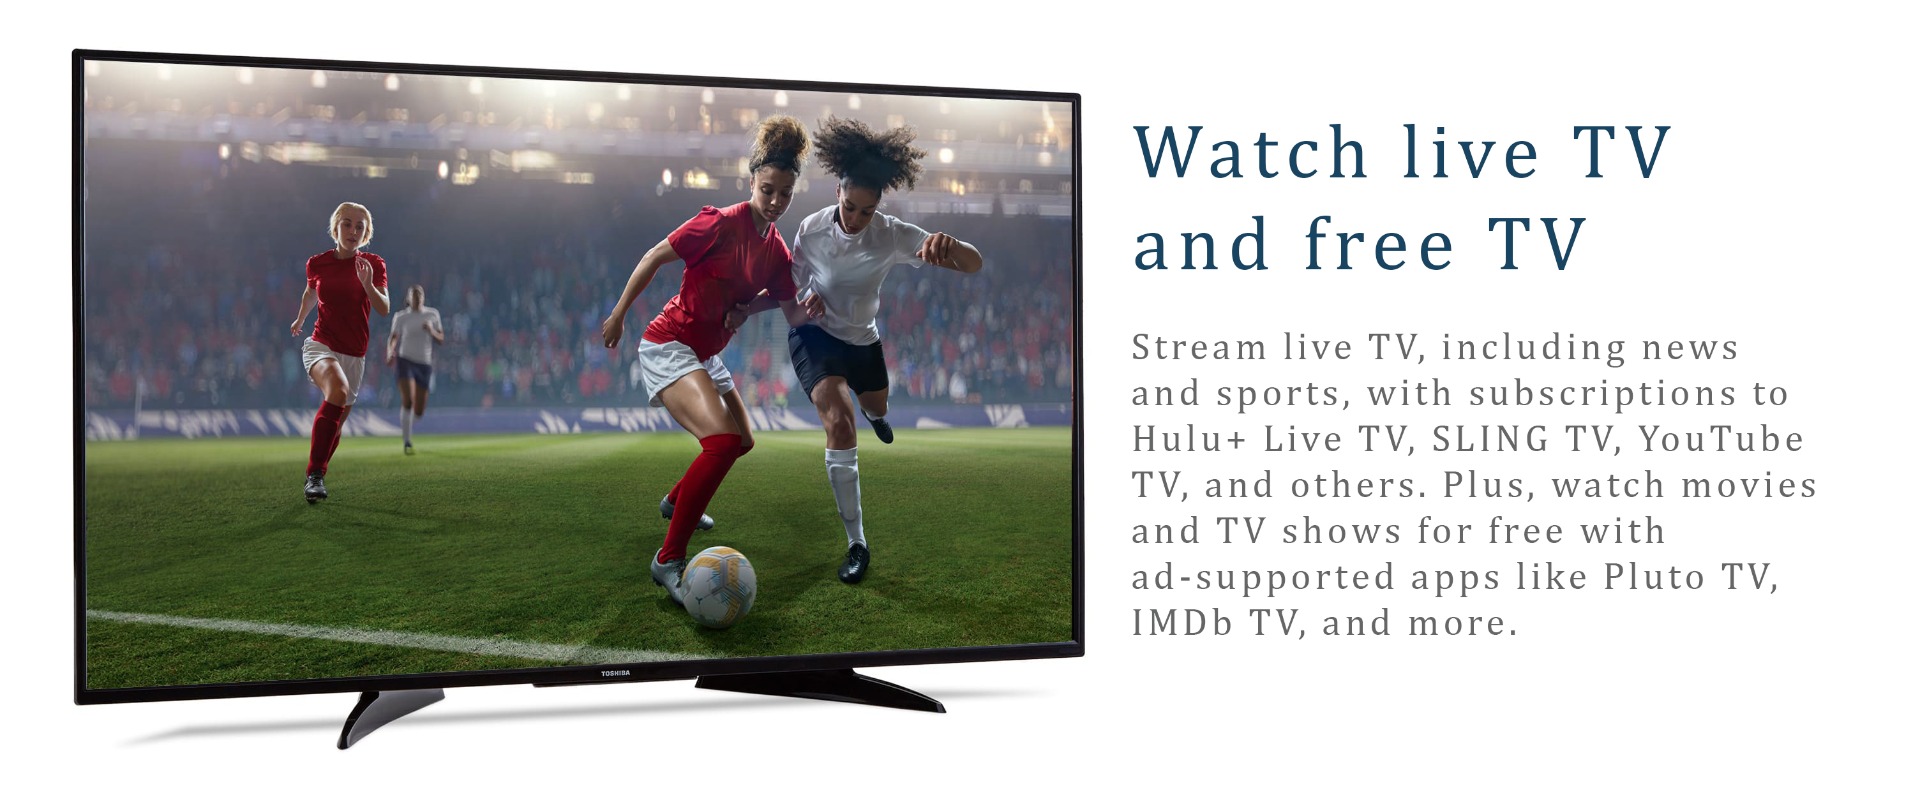 fire-tv-stick-watch-tv-live-and-free